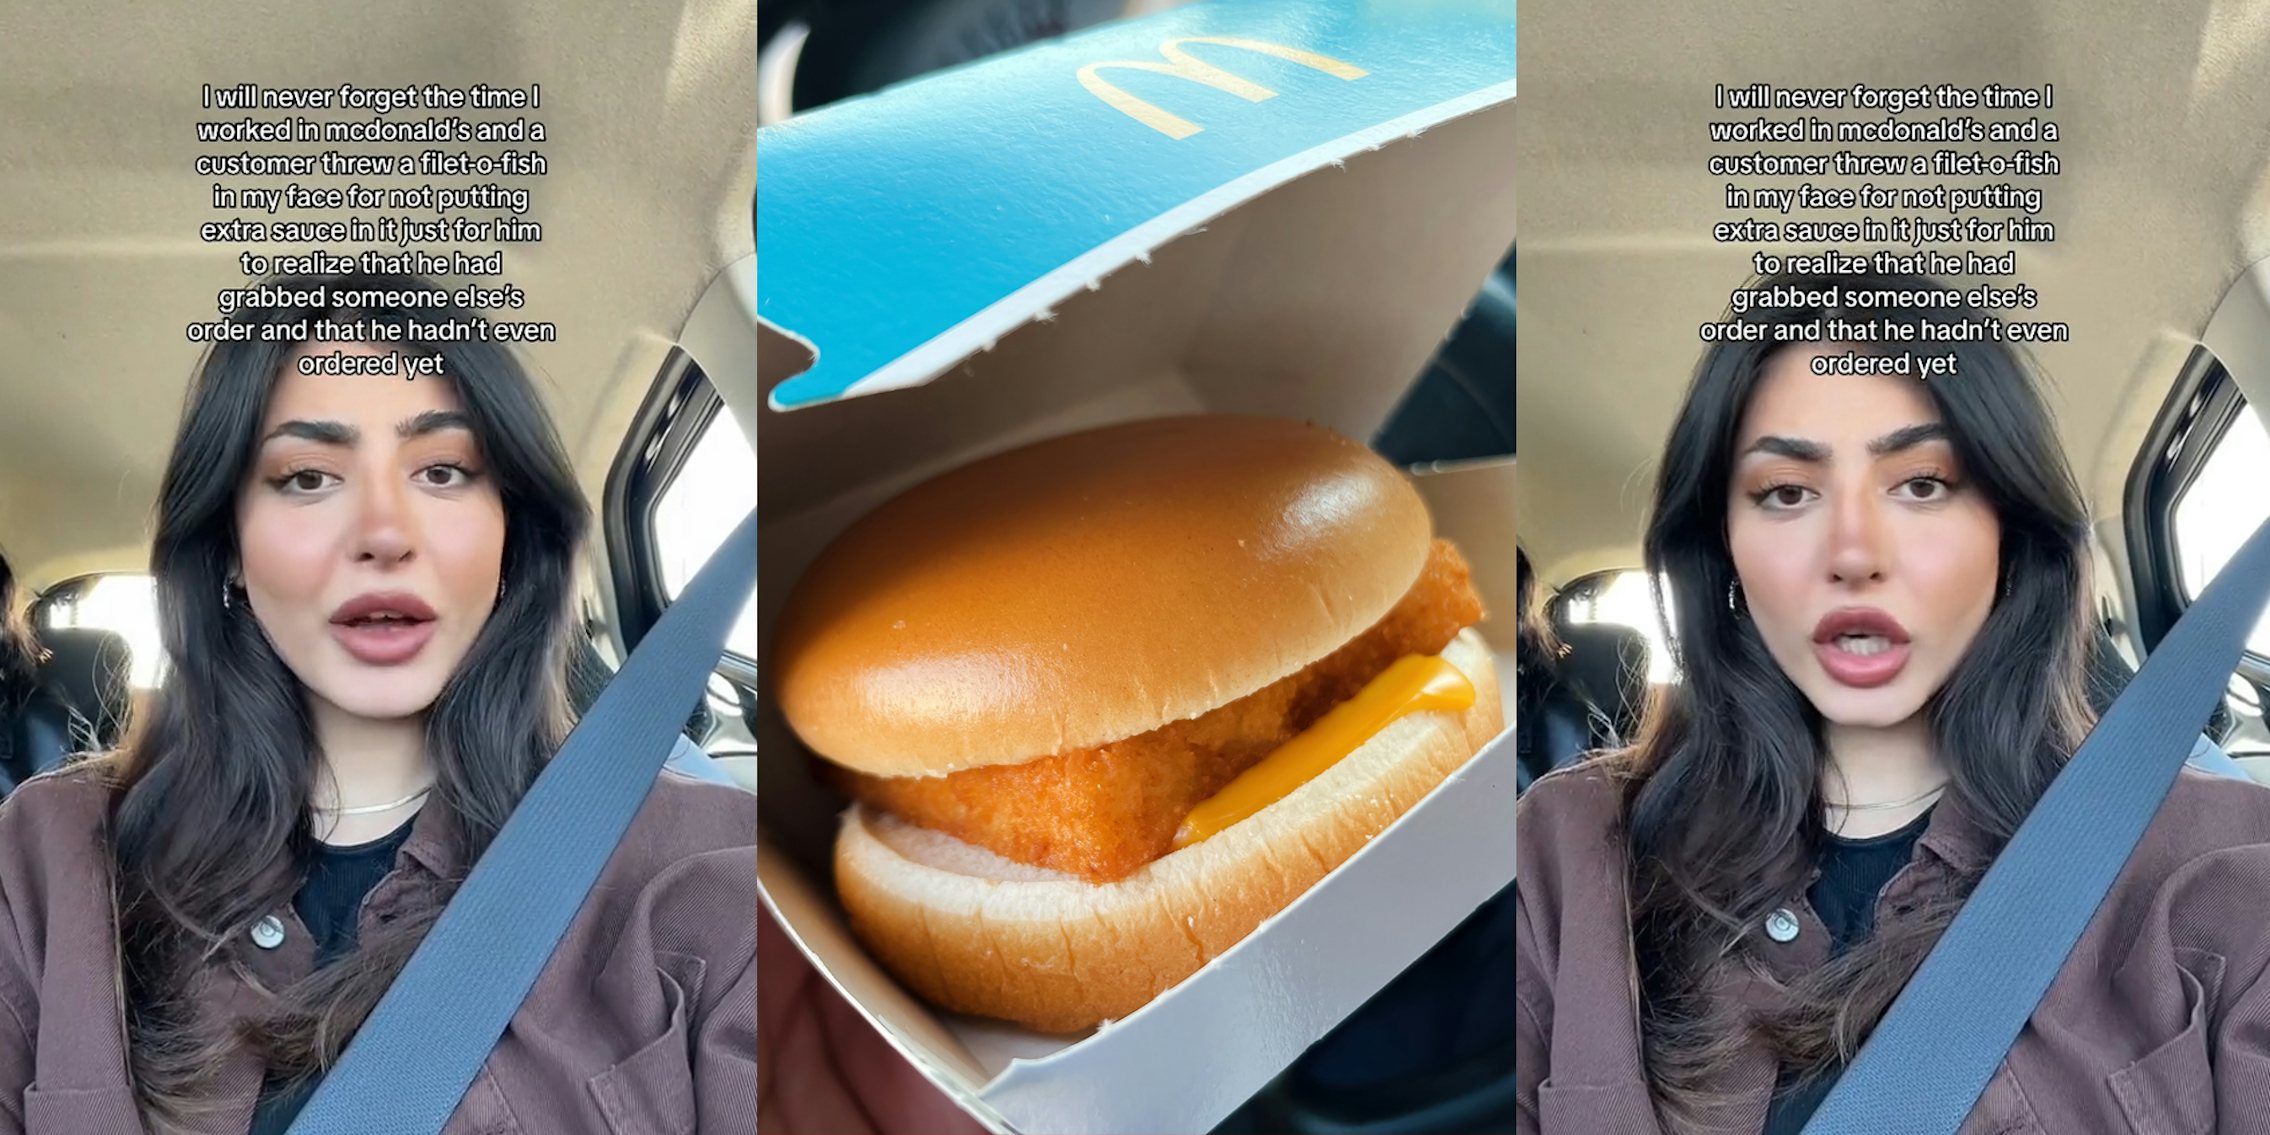 McDonald's worker speaking in car with caption 'I will never forget the time I worked in mcdonald's and a customer threw a fillet-o-fish in my face for not putting extra sauce in it just for him to realize that he had someone else's order and that he hadn't even ordered yet' (l) McDonald's Fillet-O-Fish in hand in car (c) McDonald's worker speaking in car with caption 'I will never forget the time I worked in mcdonald's and a customer threw a fillet-o-fish in my face for not putting extra sauce in it just for him to realize that he had someone else's order and that he hadn't even ordered yet' (r)